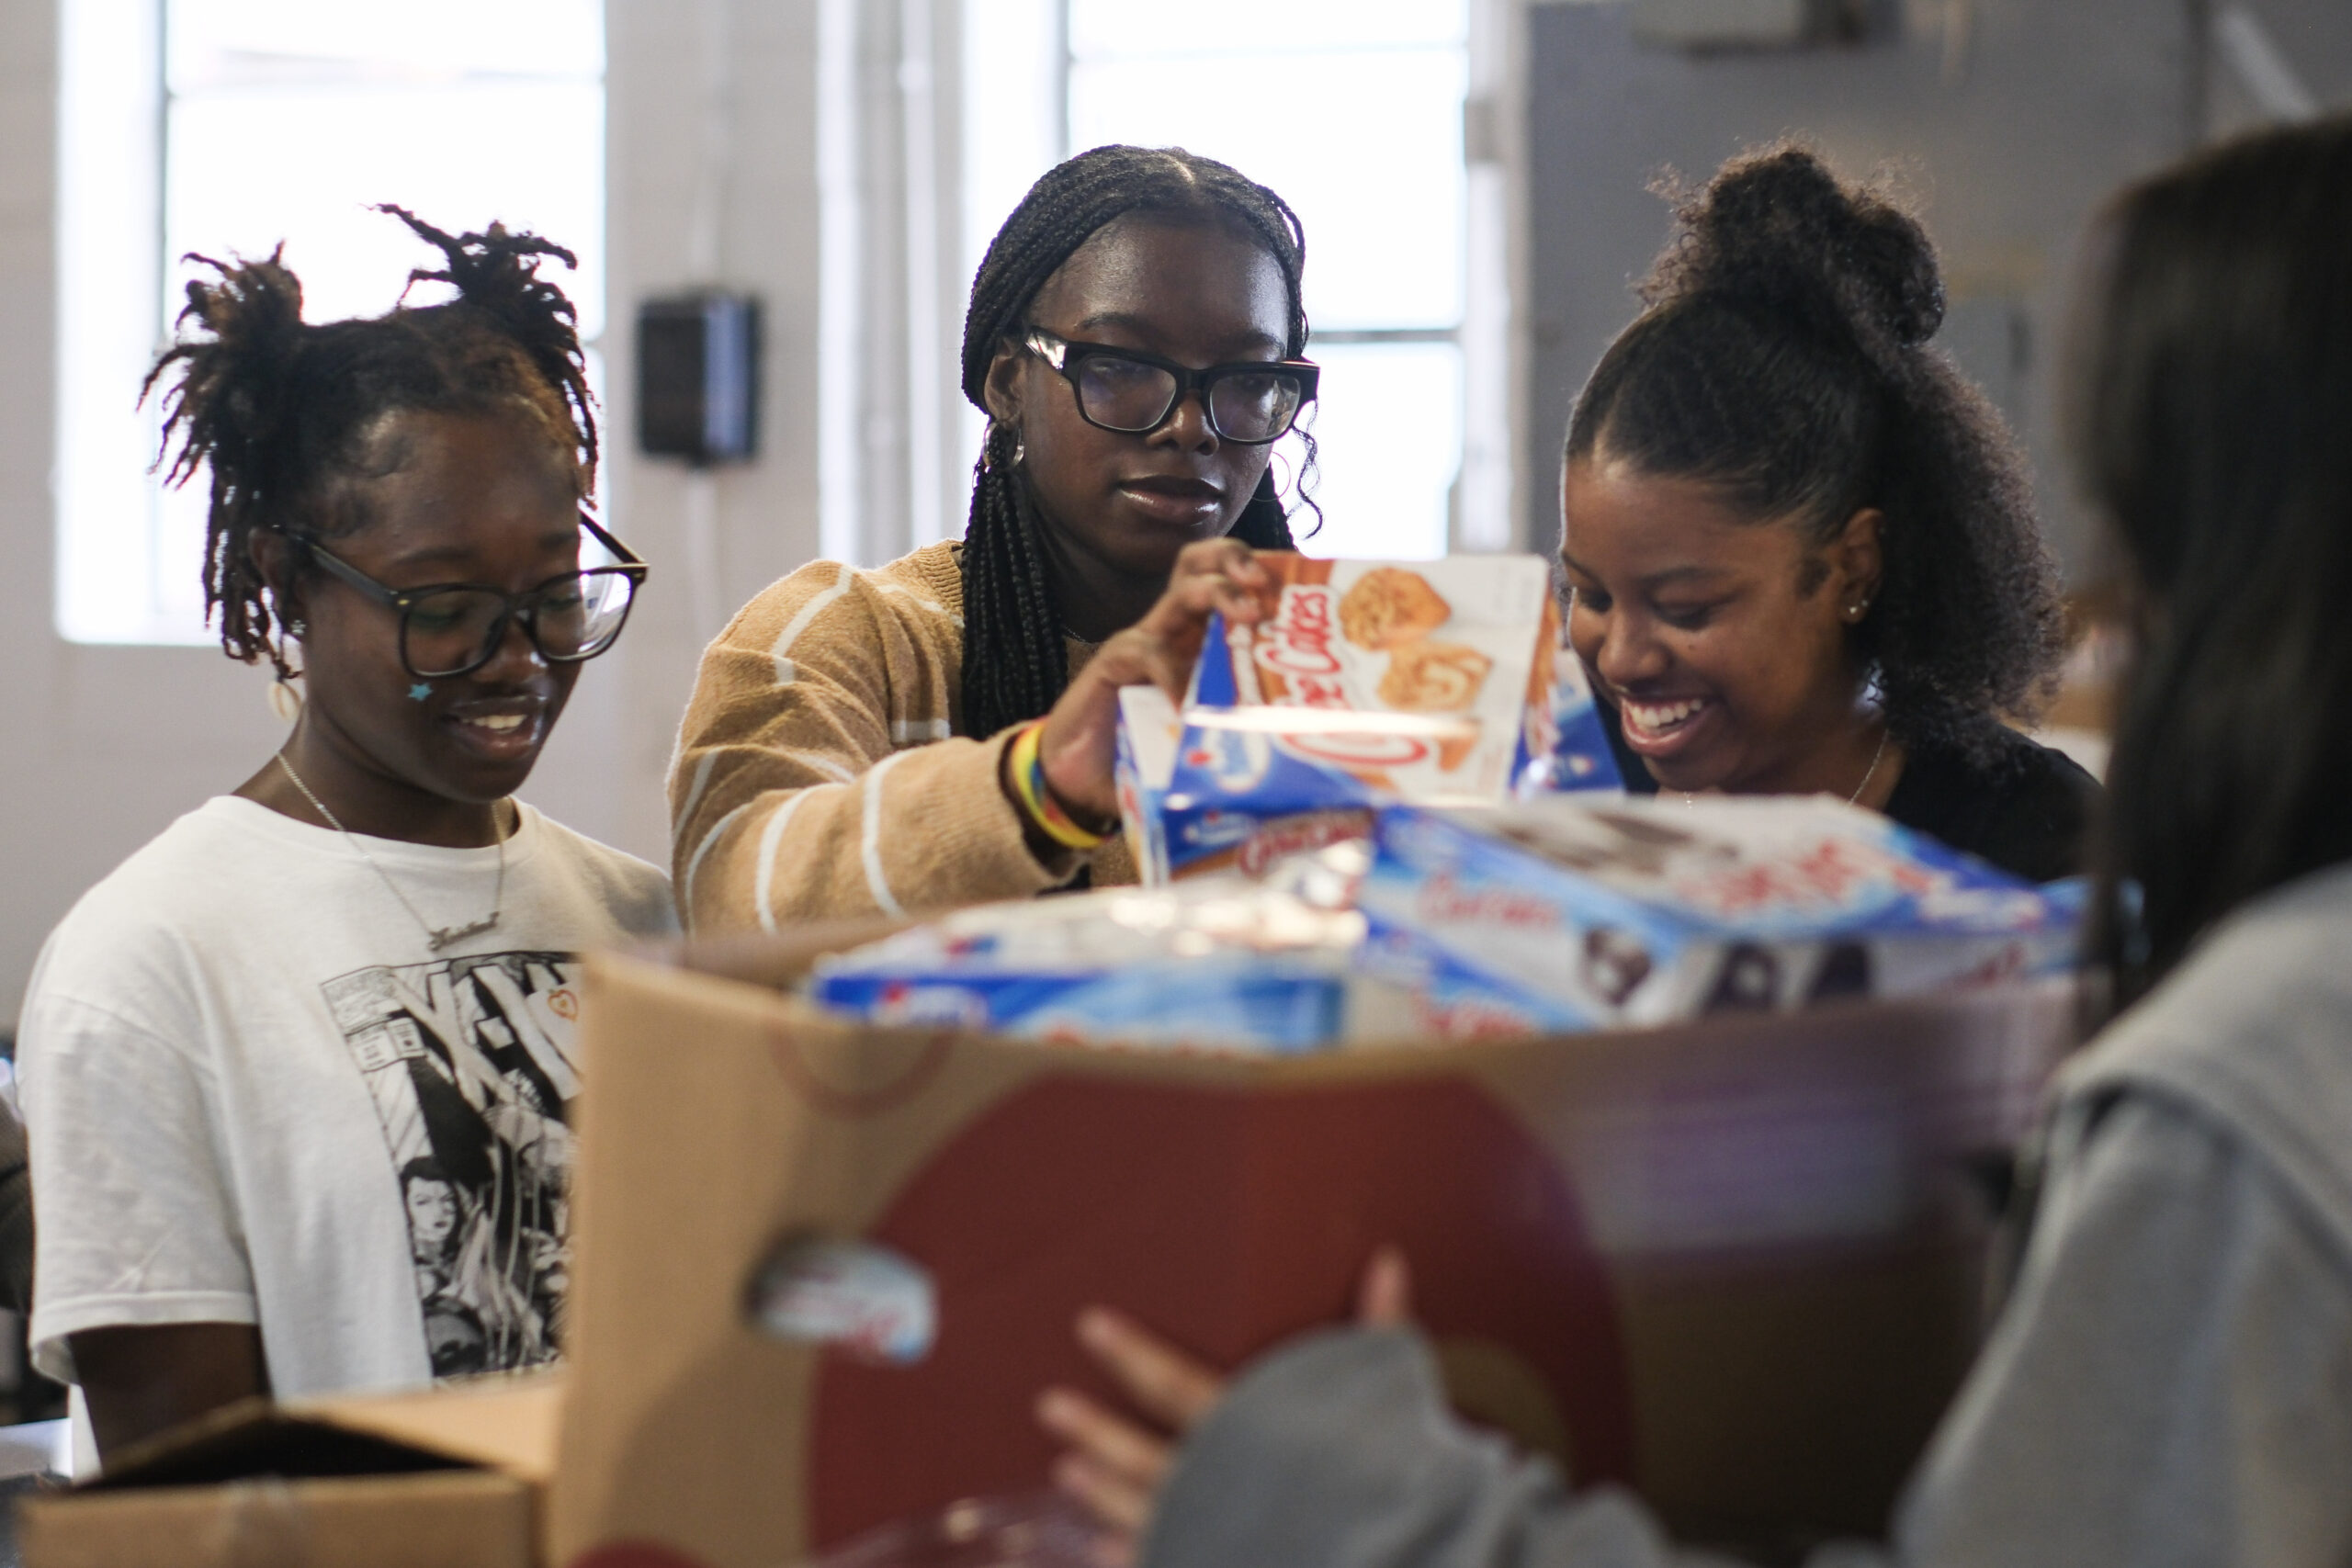 Student volunteers from Key School, from left, Kristina Ajayi, 16, Chloe McCarthy, 16, and Tayla Roan, 17, prepare food distributions at The Anne Arundel County Food Bank this week. Photo. (Tommy Tucker/Capital News Service)